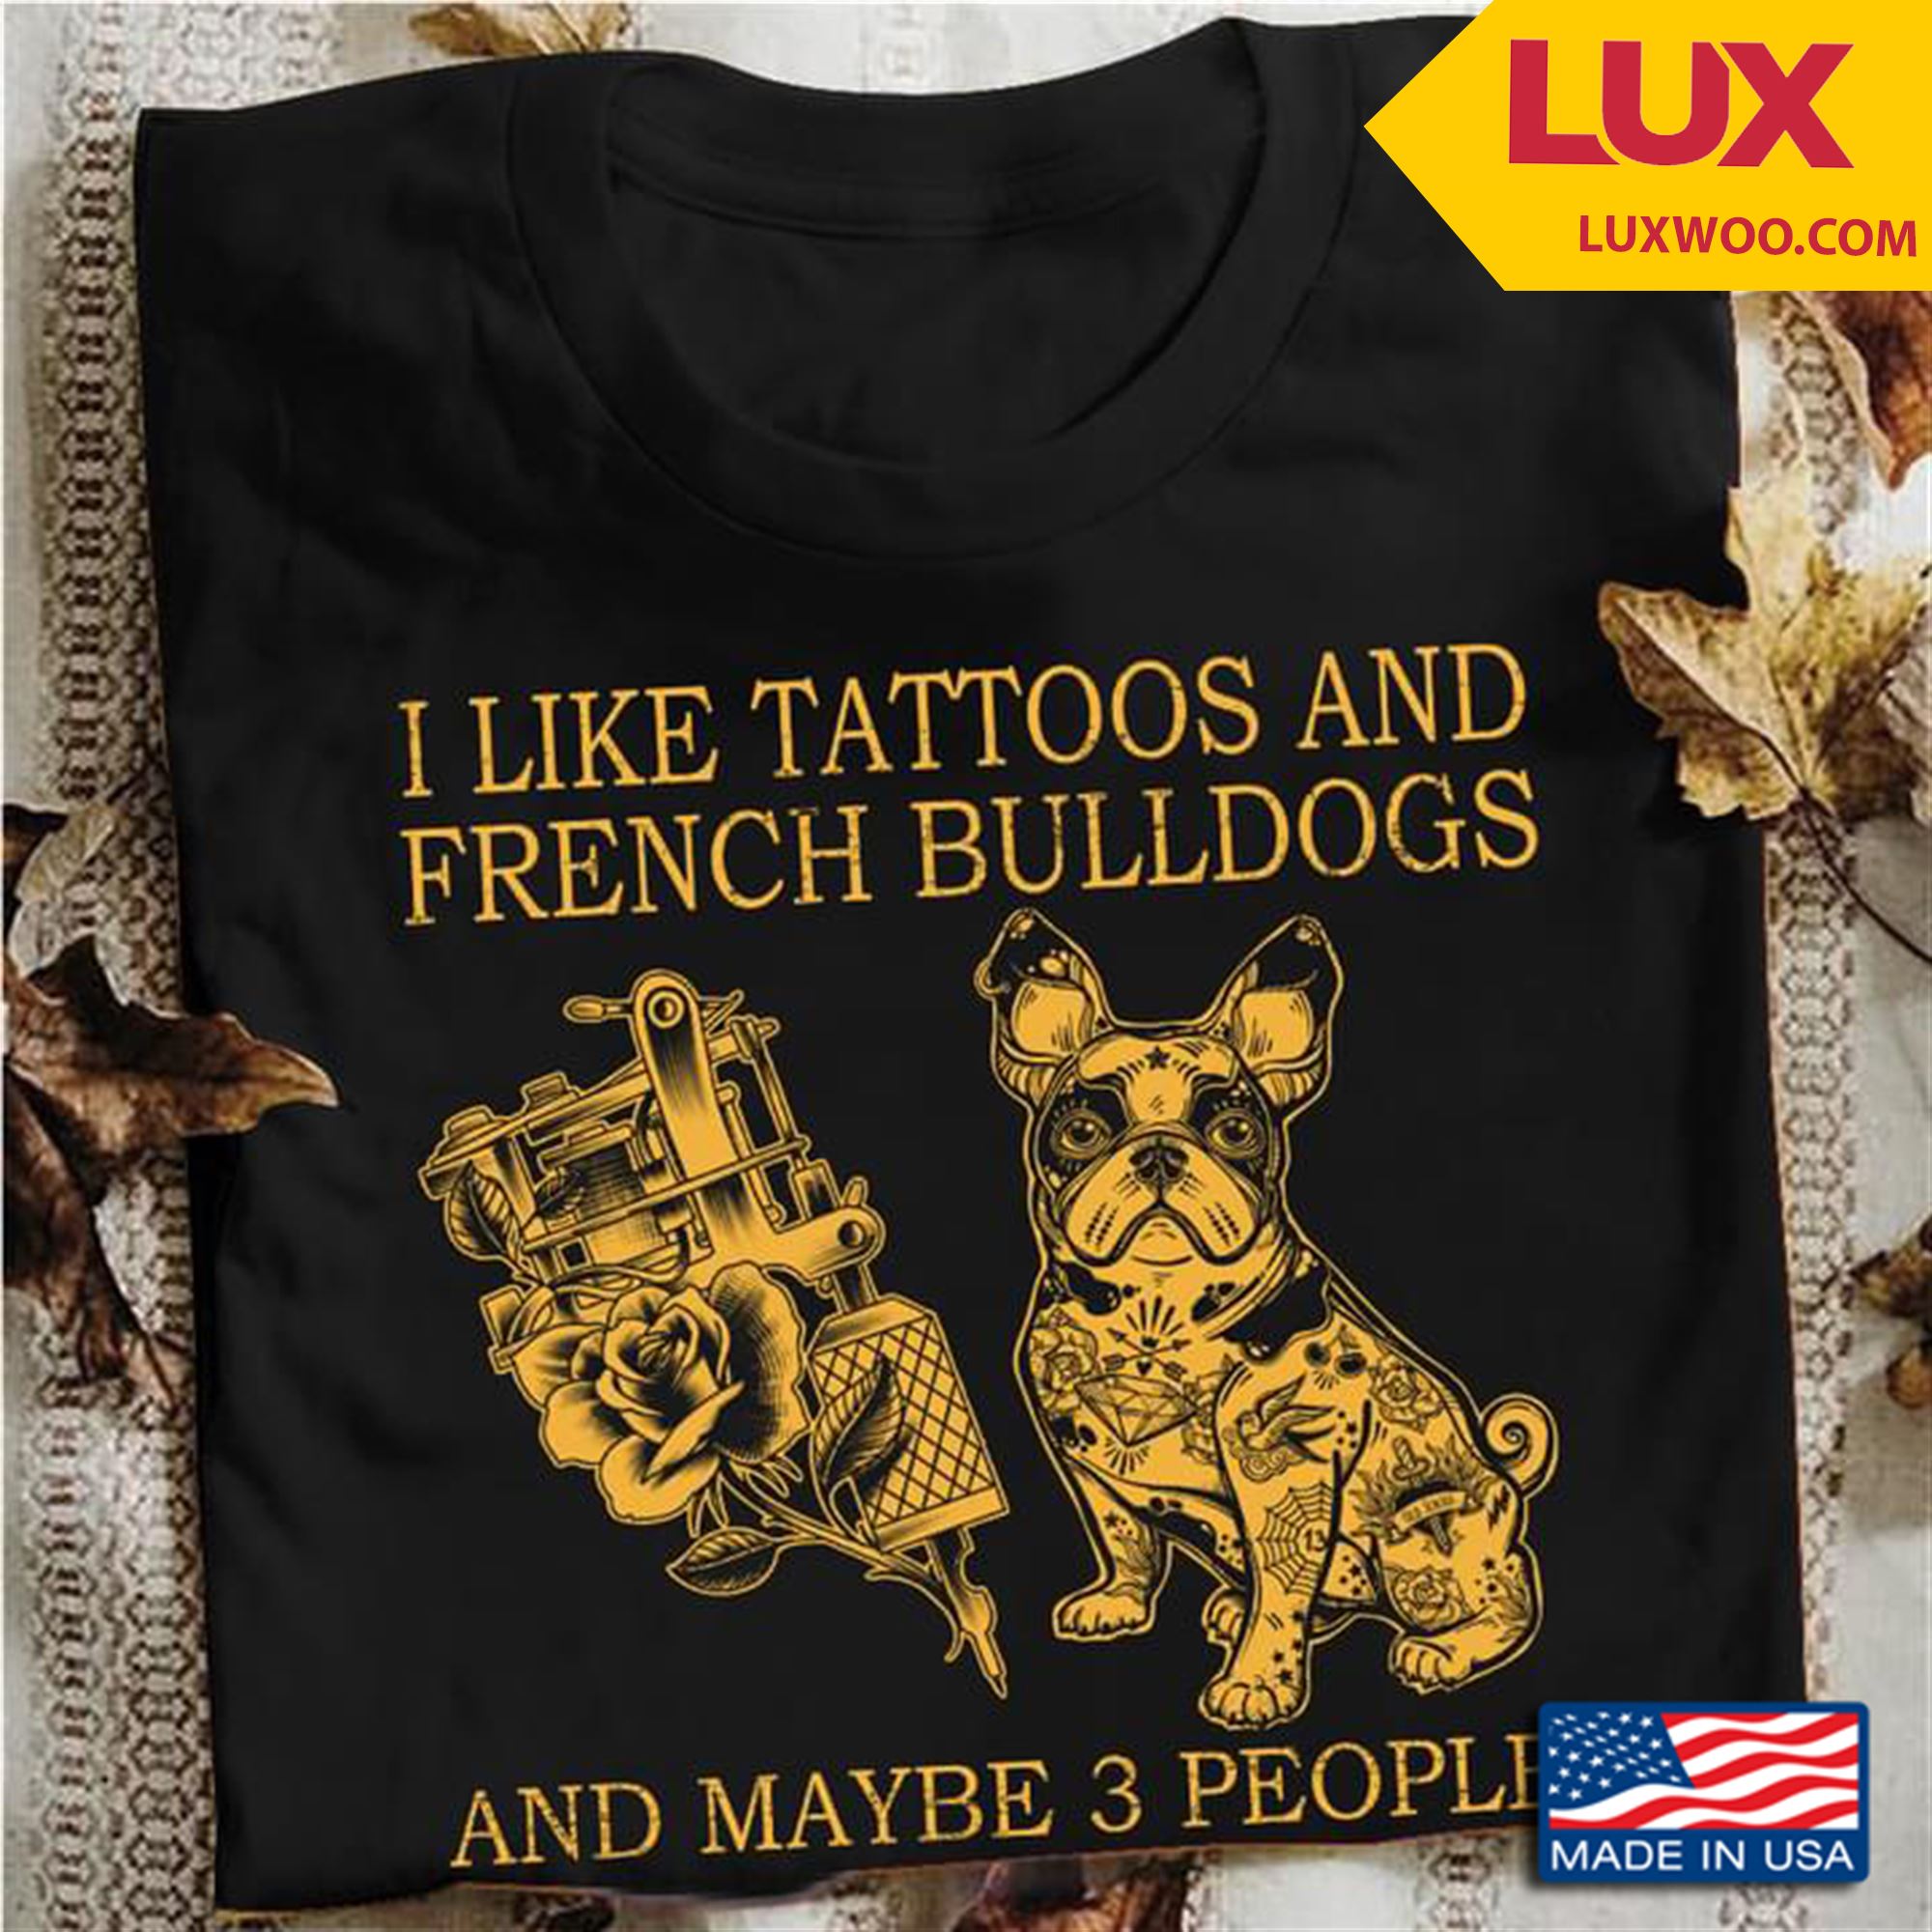 I Like Tattoos And French Bulldogs And Maybe 3 People Tshirt Size Up To 5xl